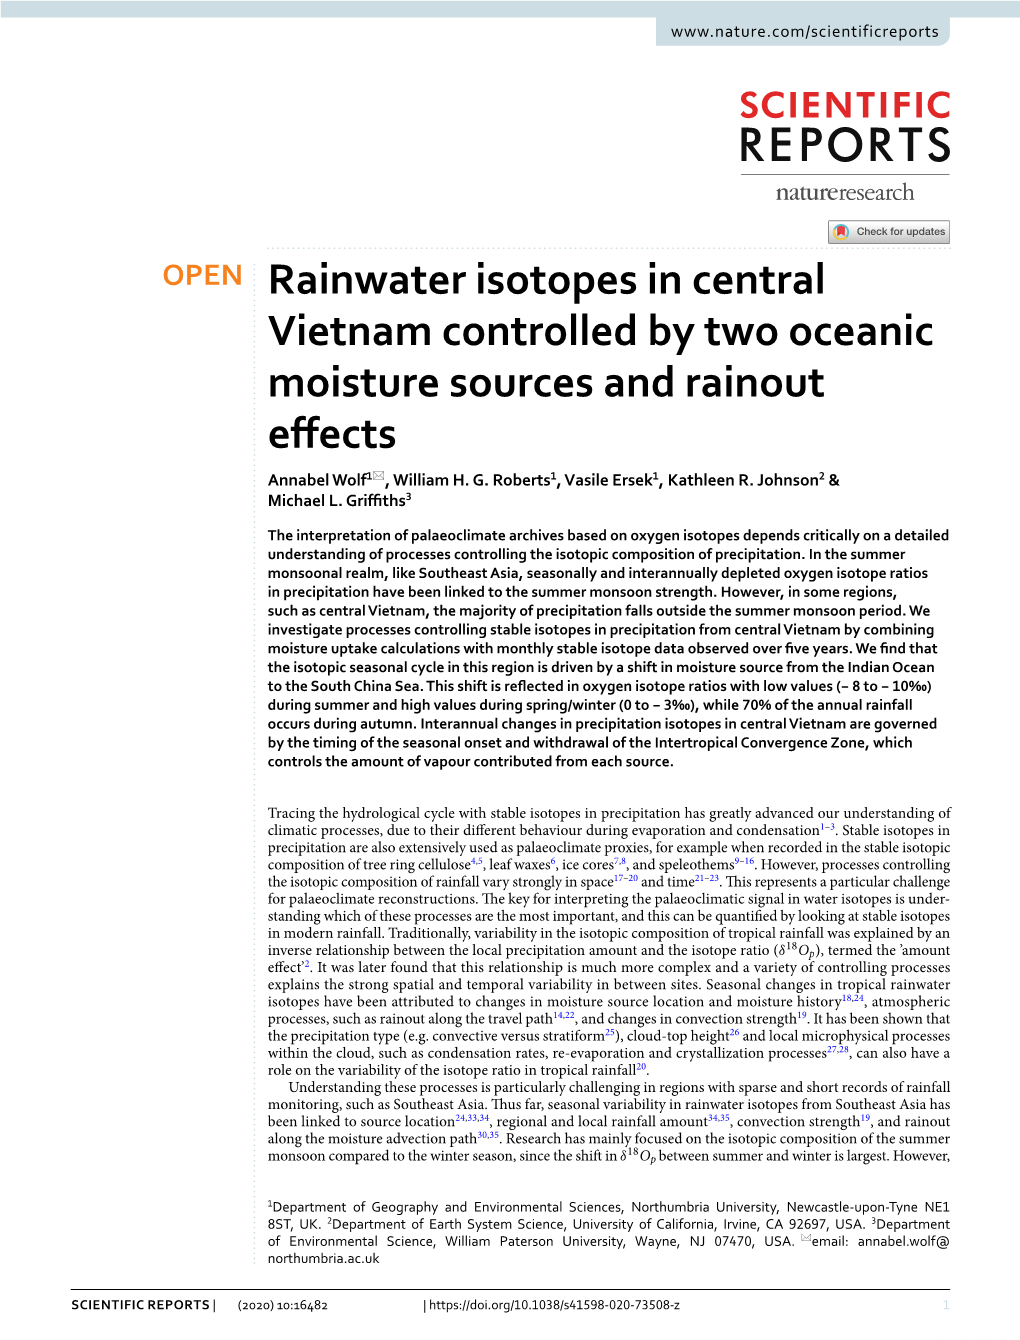 Rainwater Isotopes in Central Vietnam Controlled by Two Oceanic Moisture Sources and Rainout Efects Annabel Wolf1*, William H